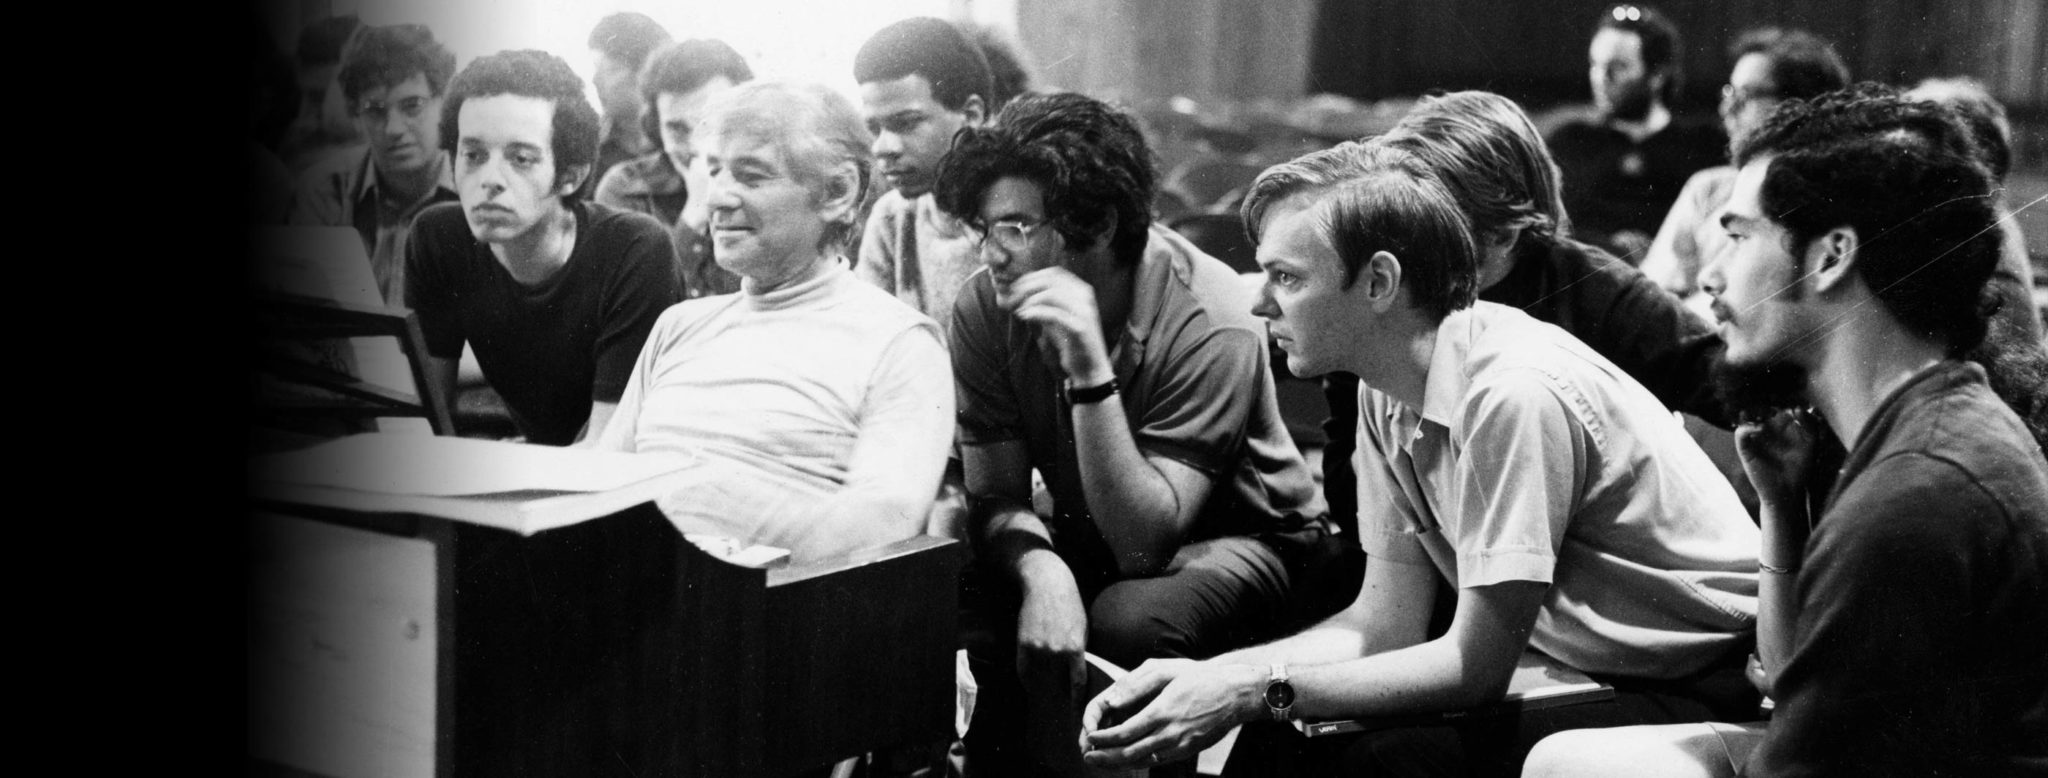 Leonard Bernstein sits at a piano discussing a work while surrounded by TMC students. To his left is conducting student Isaiah Jackson, ca. 1970. (Credit: Heinz Weissenstein/Boston Symphony Orchestra Archives)